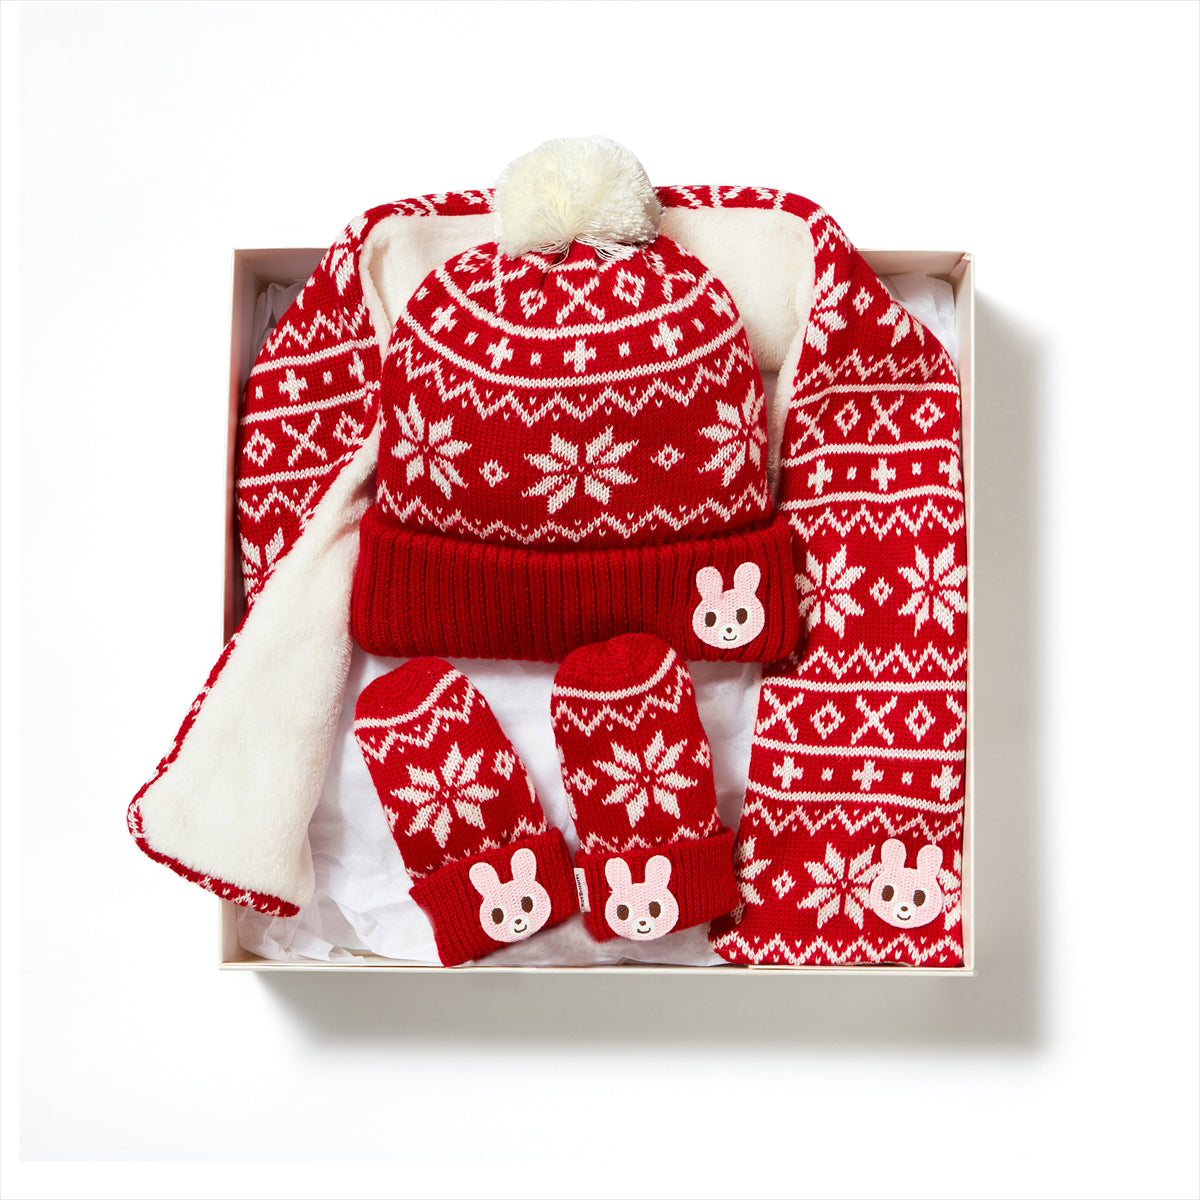 Deluxe Nordic Knit Gift Set